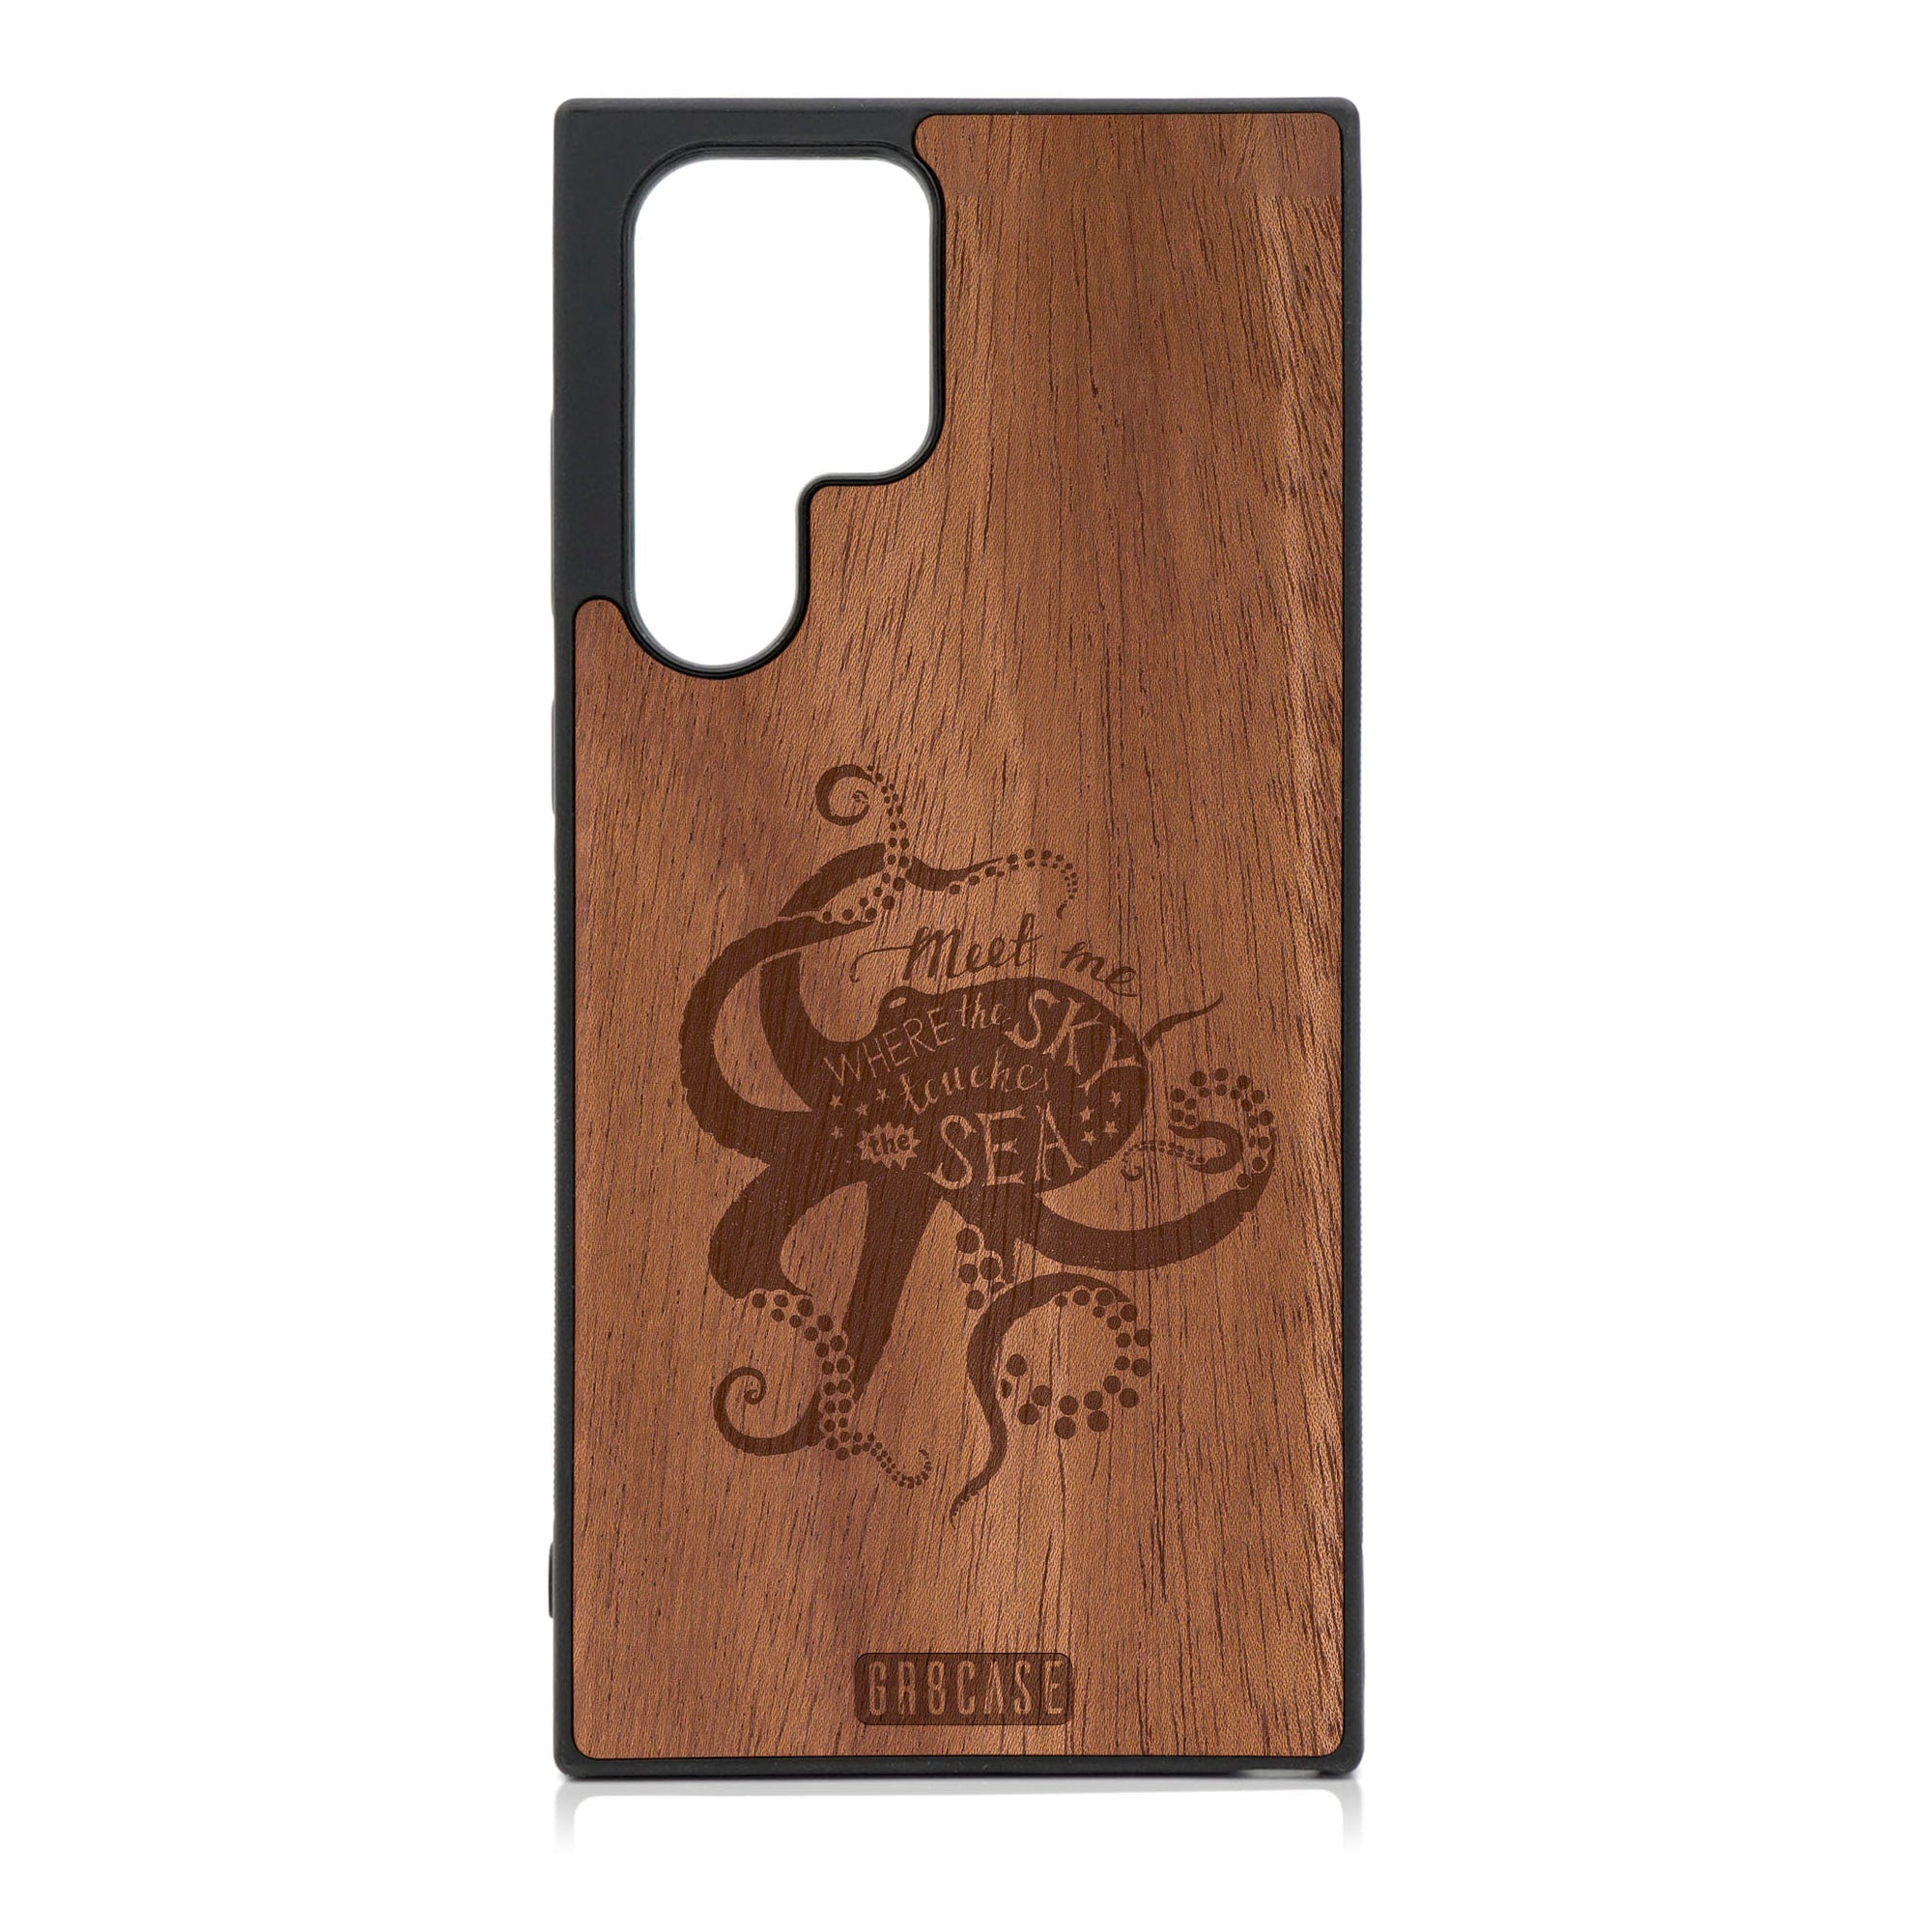 Meet Me Where The Sky Touches The Sea (Octopus) Design Wood Case For Galaxy S22 Ultra